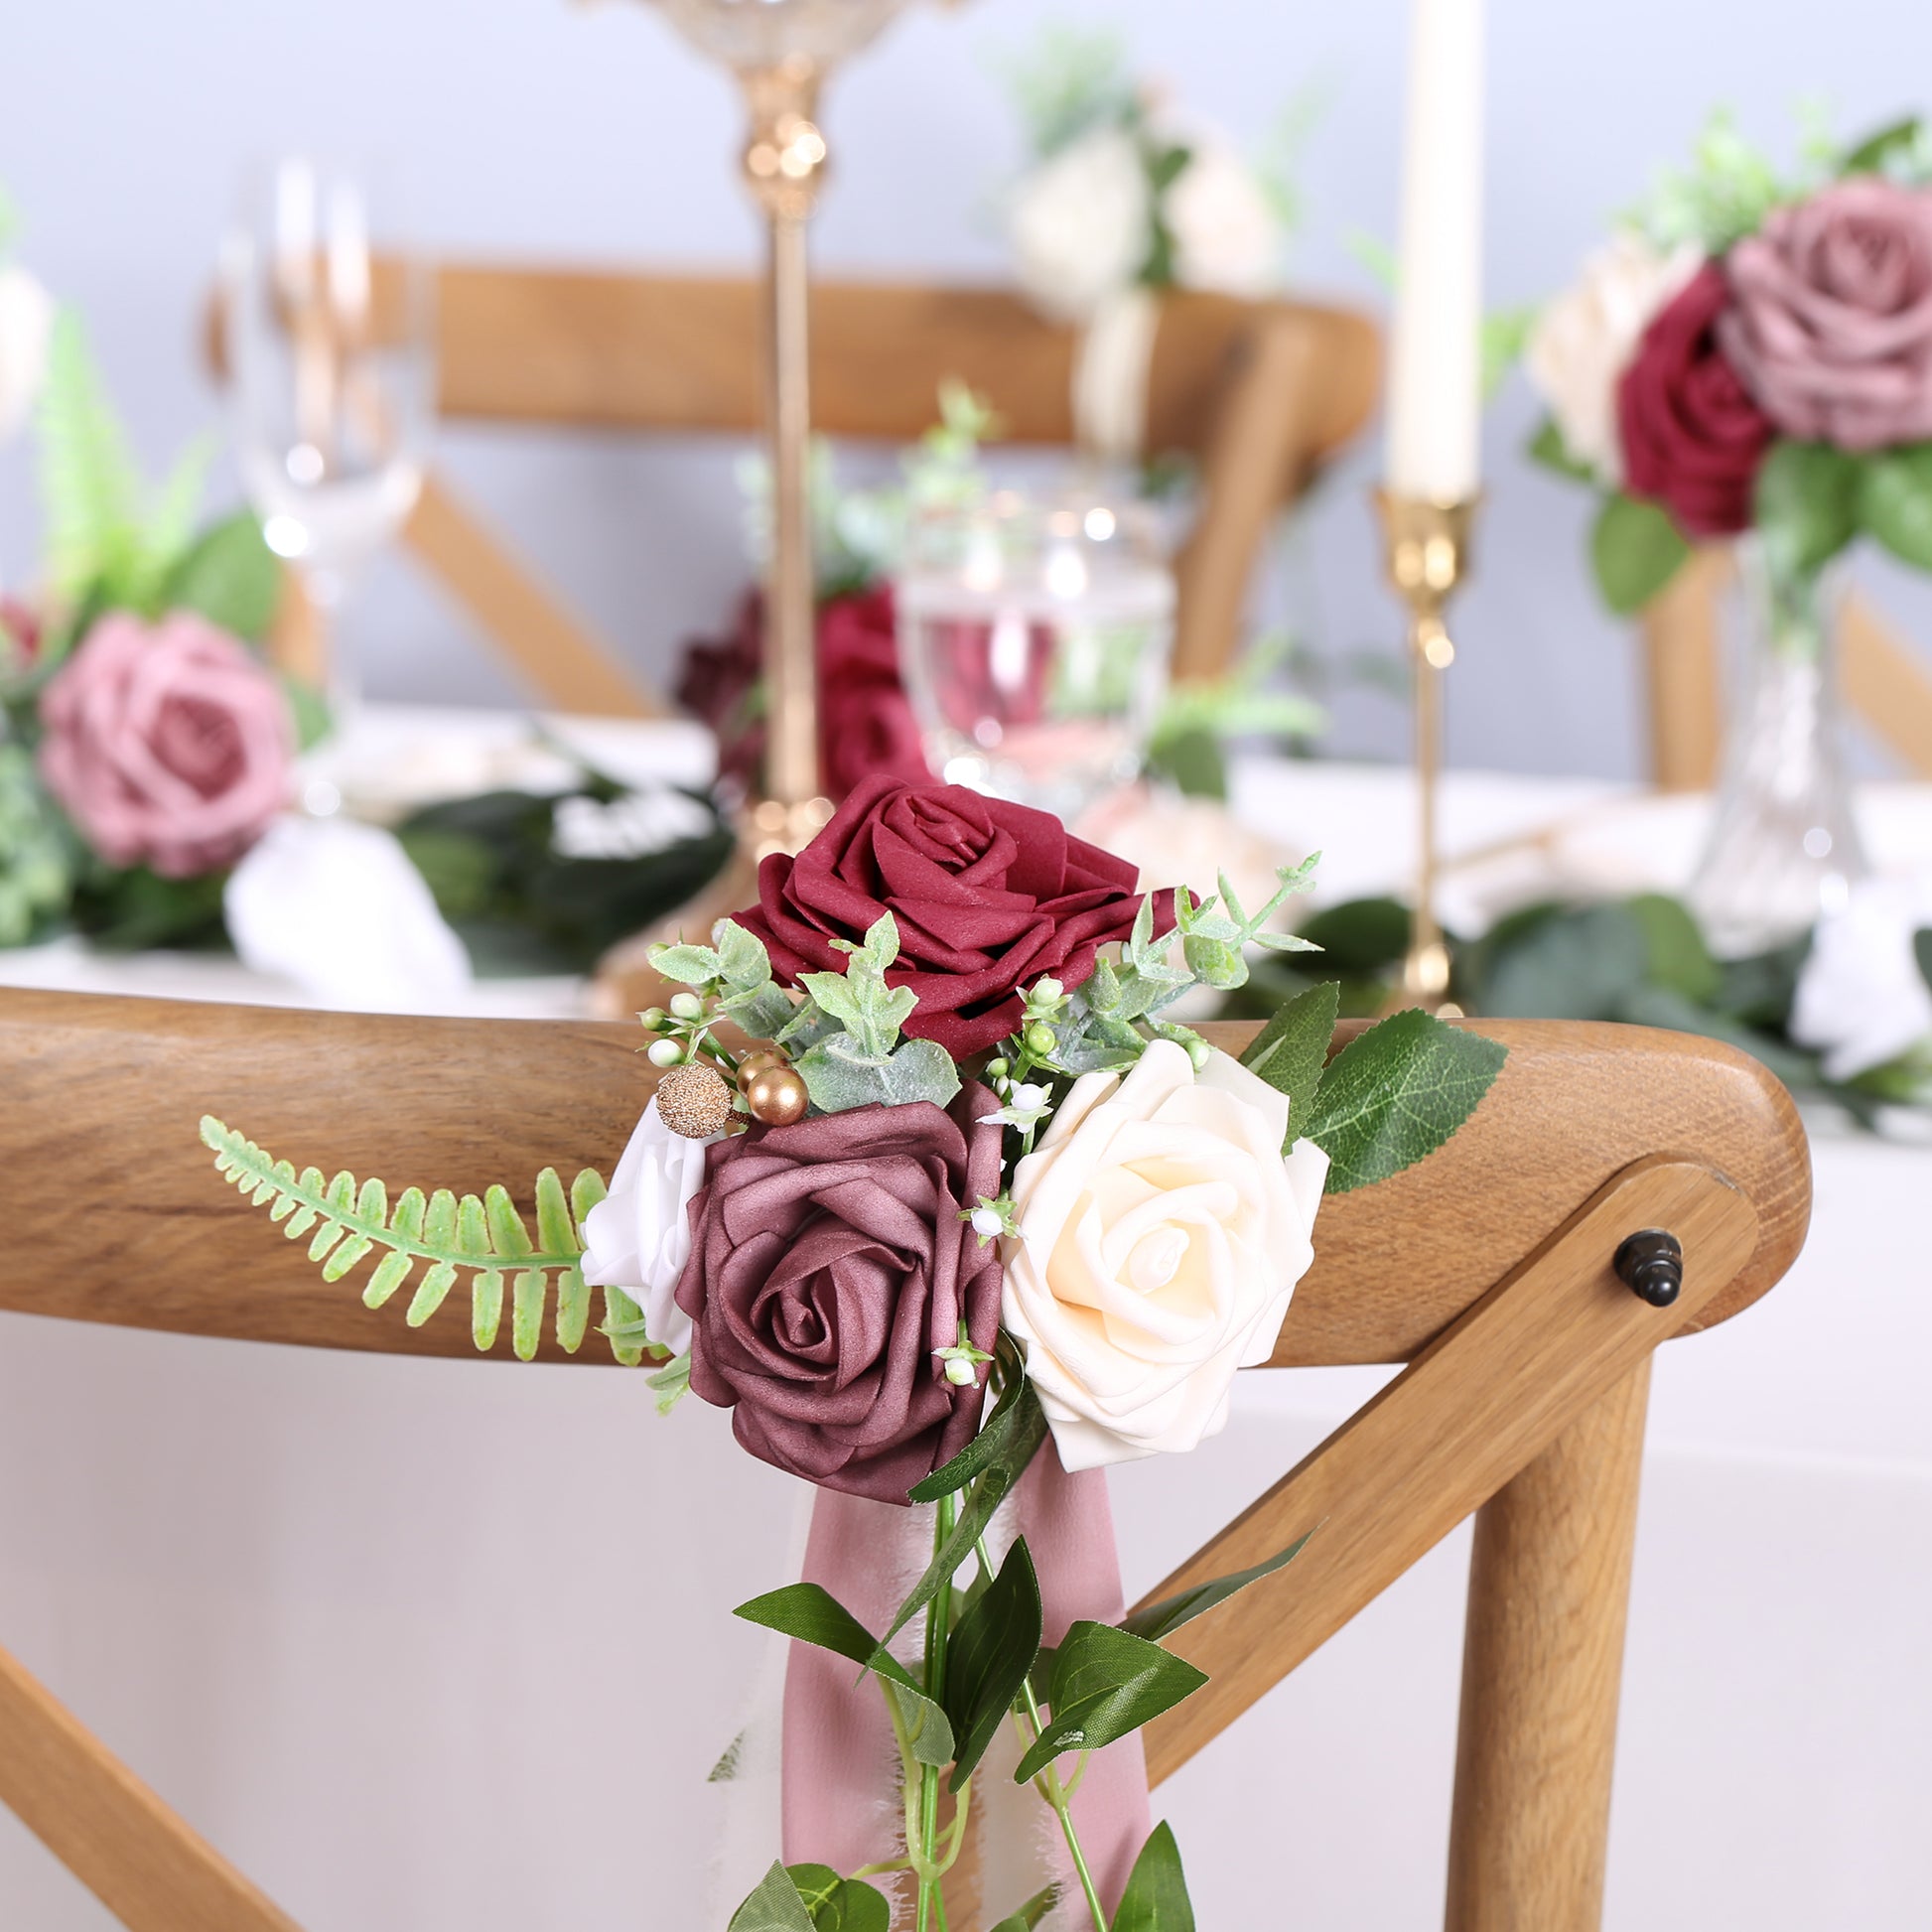 Wedding Aisle Decorations Mauve Burgundy Pew Flowers Set of 10 for Wedding  Ceremony Party Chair Decor with Artificial Flowers Eucalyptus and Ribbons